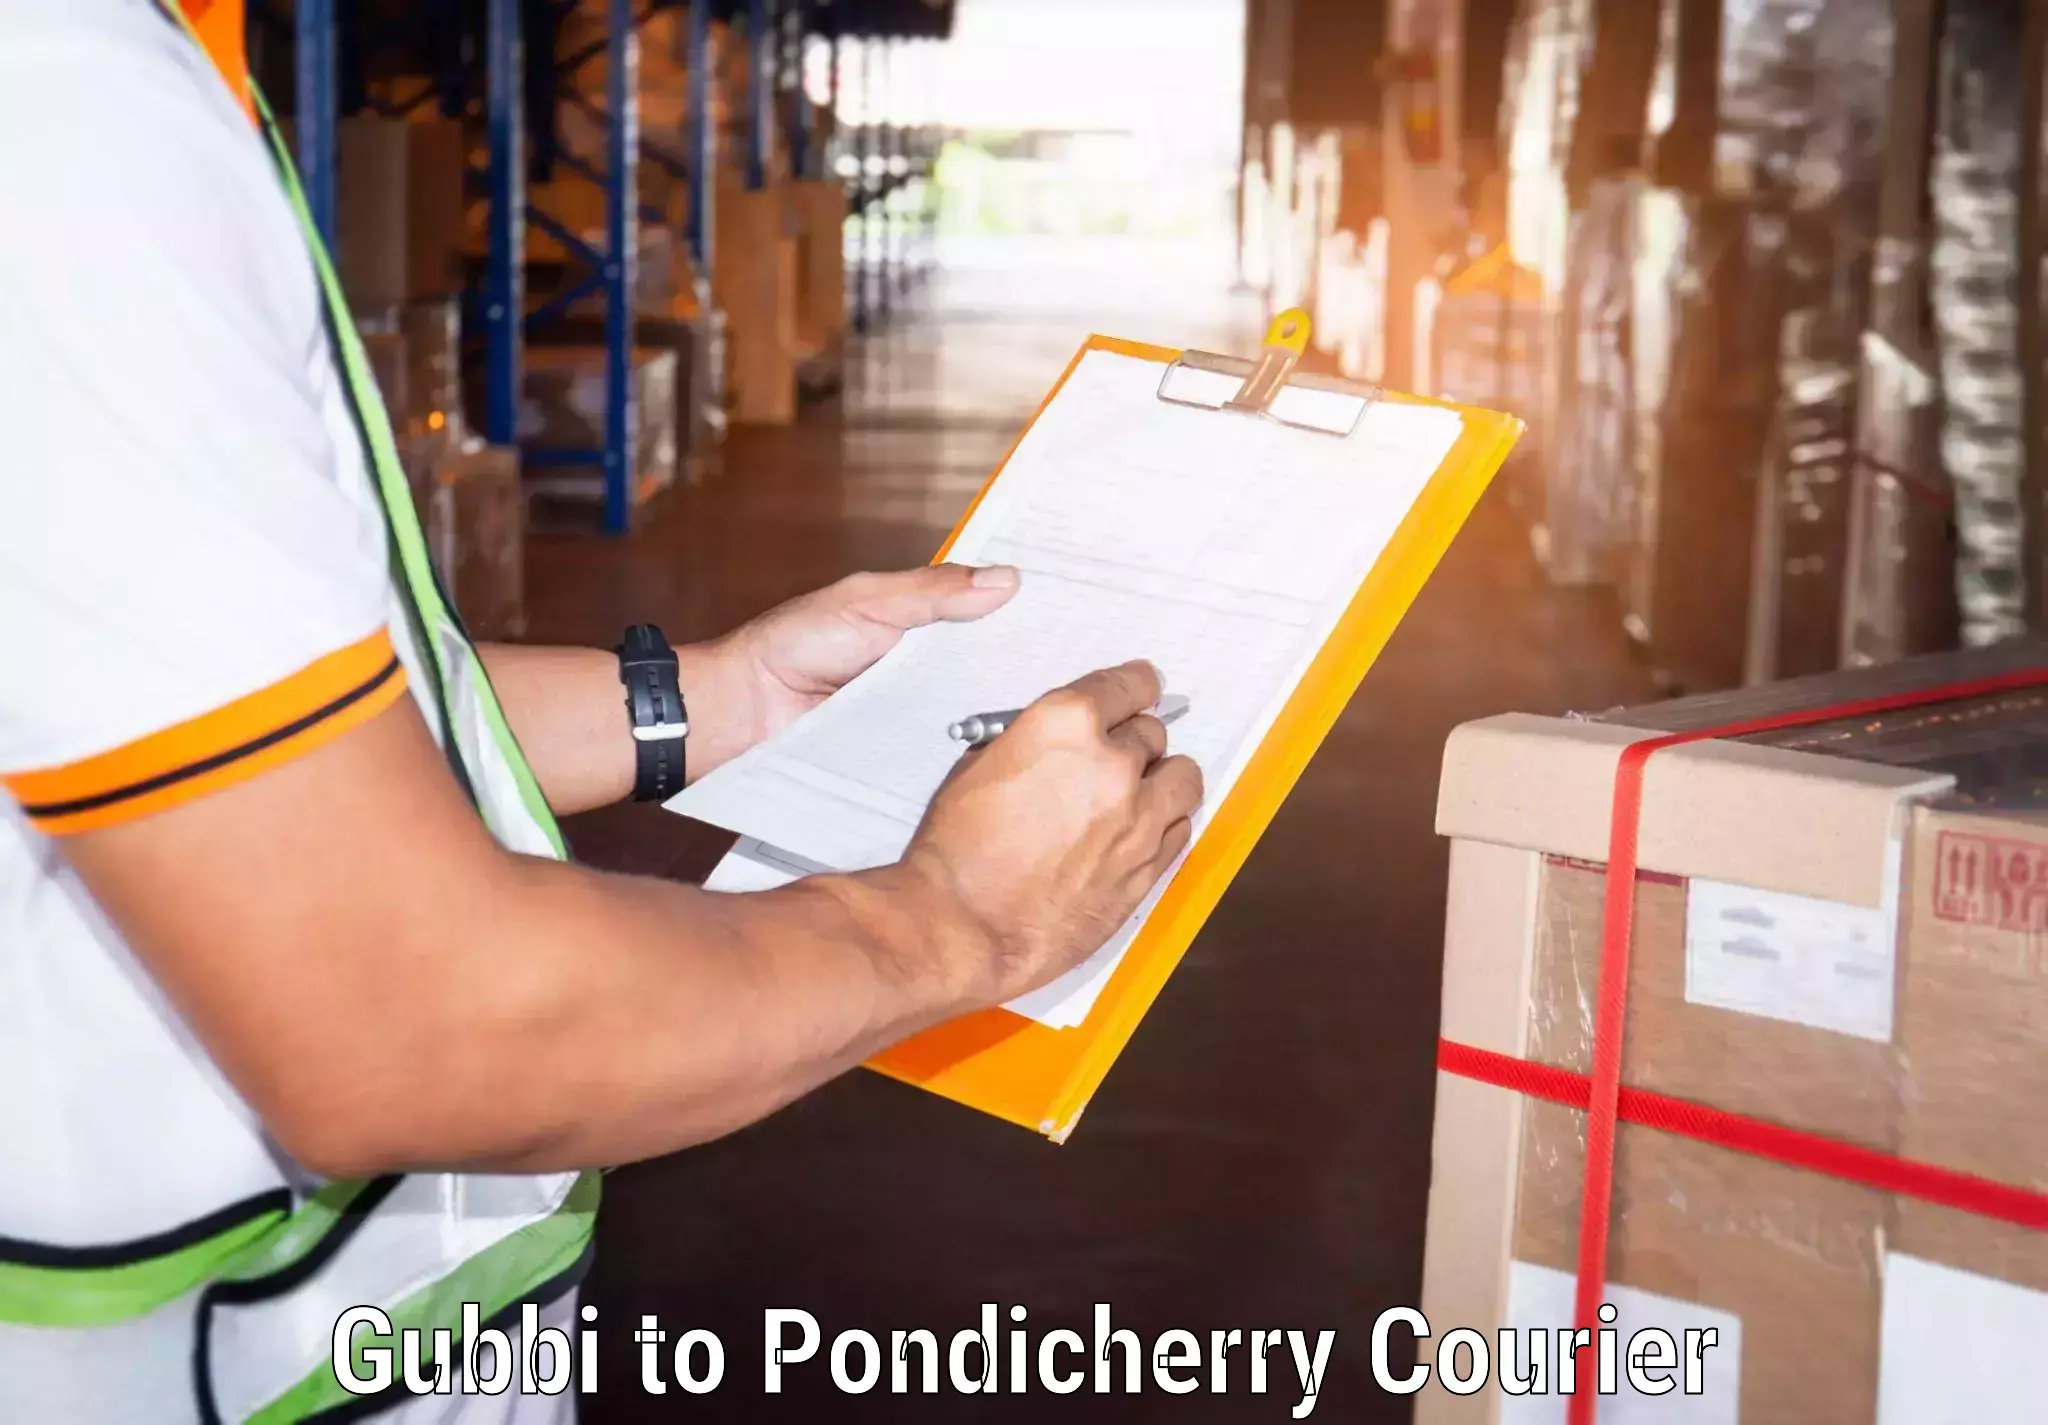 Package delivery network Gubbi to Pondicherry University